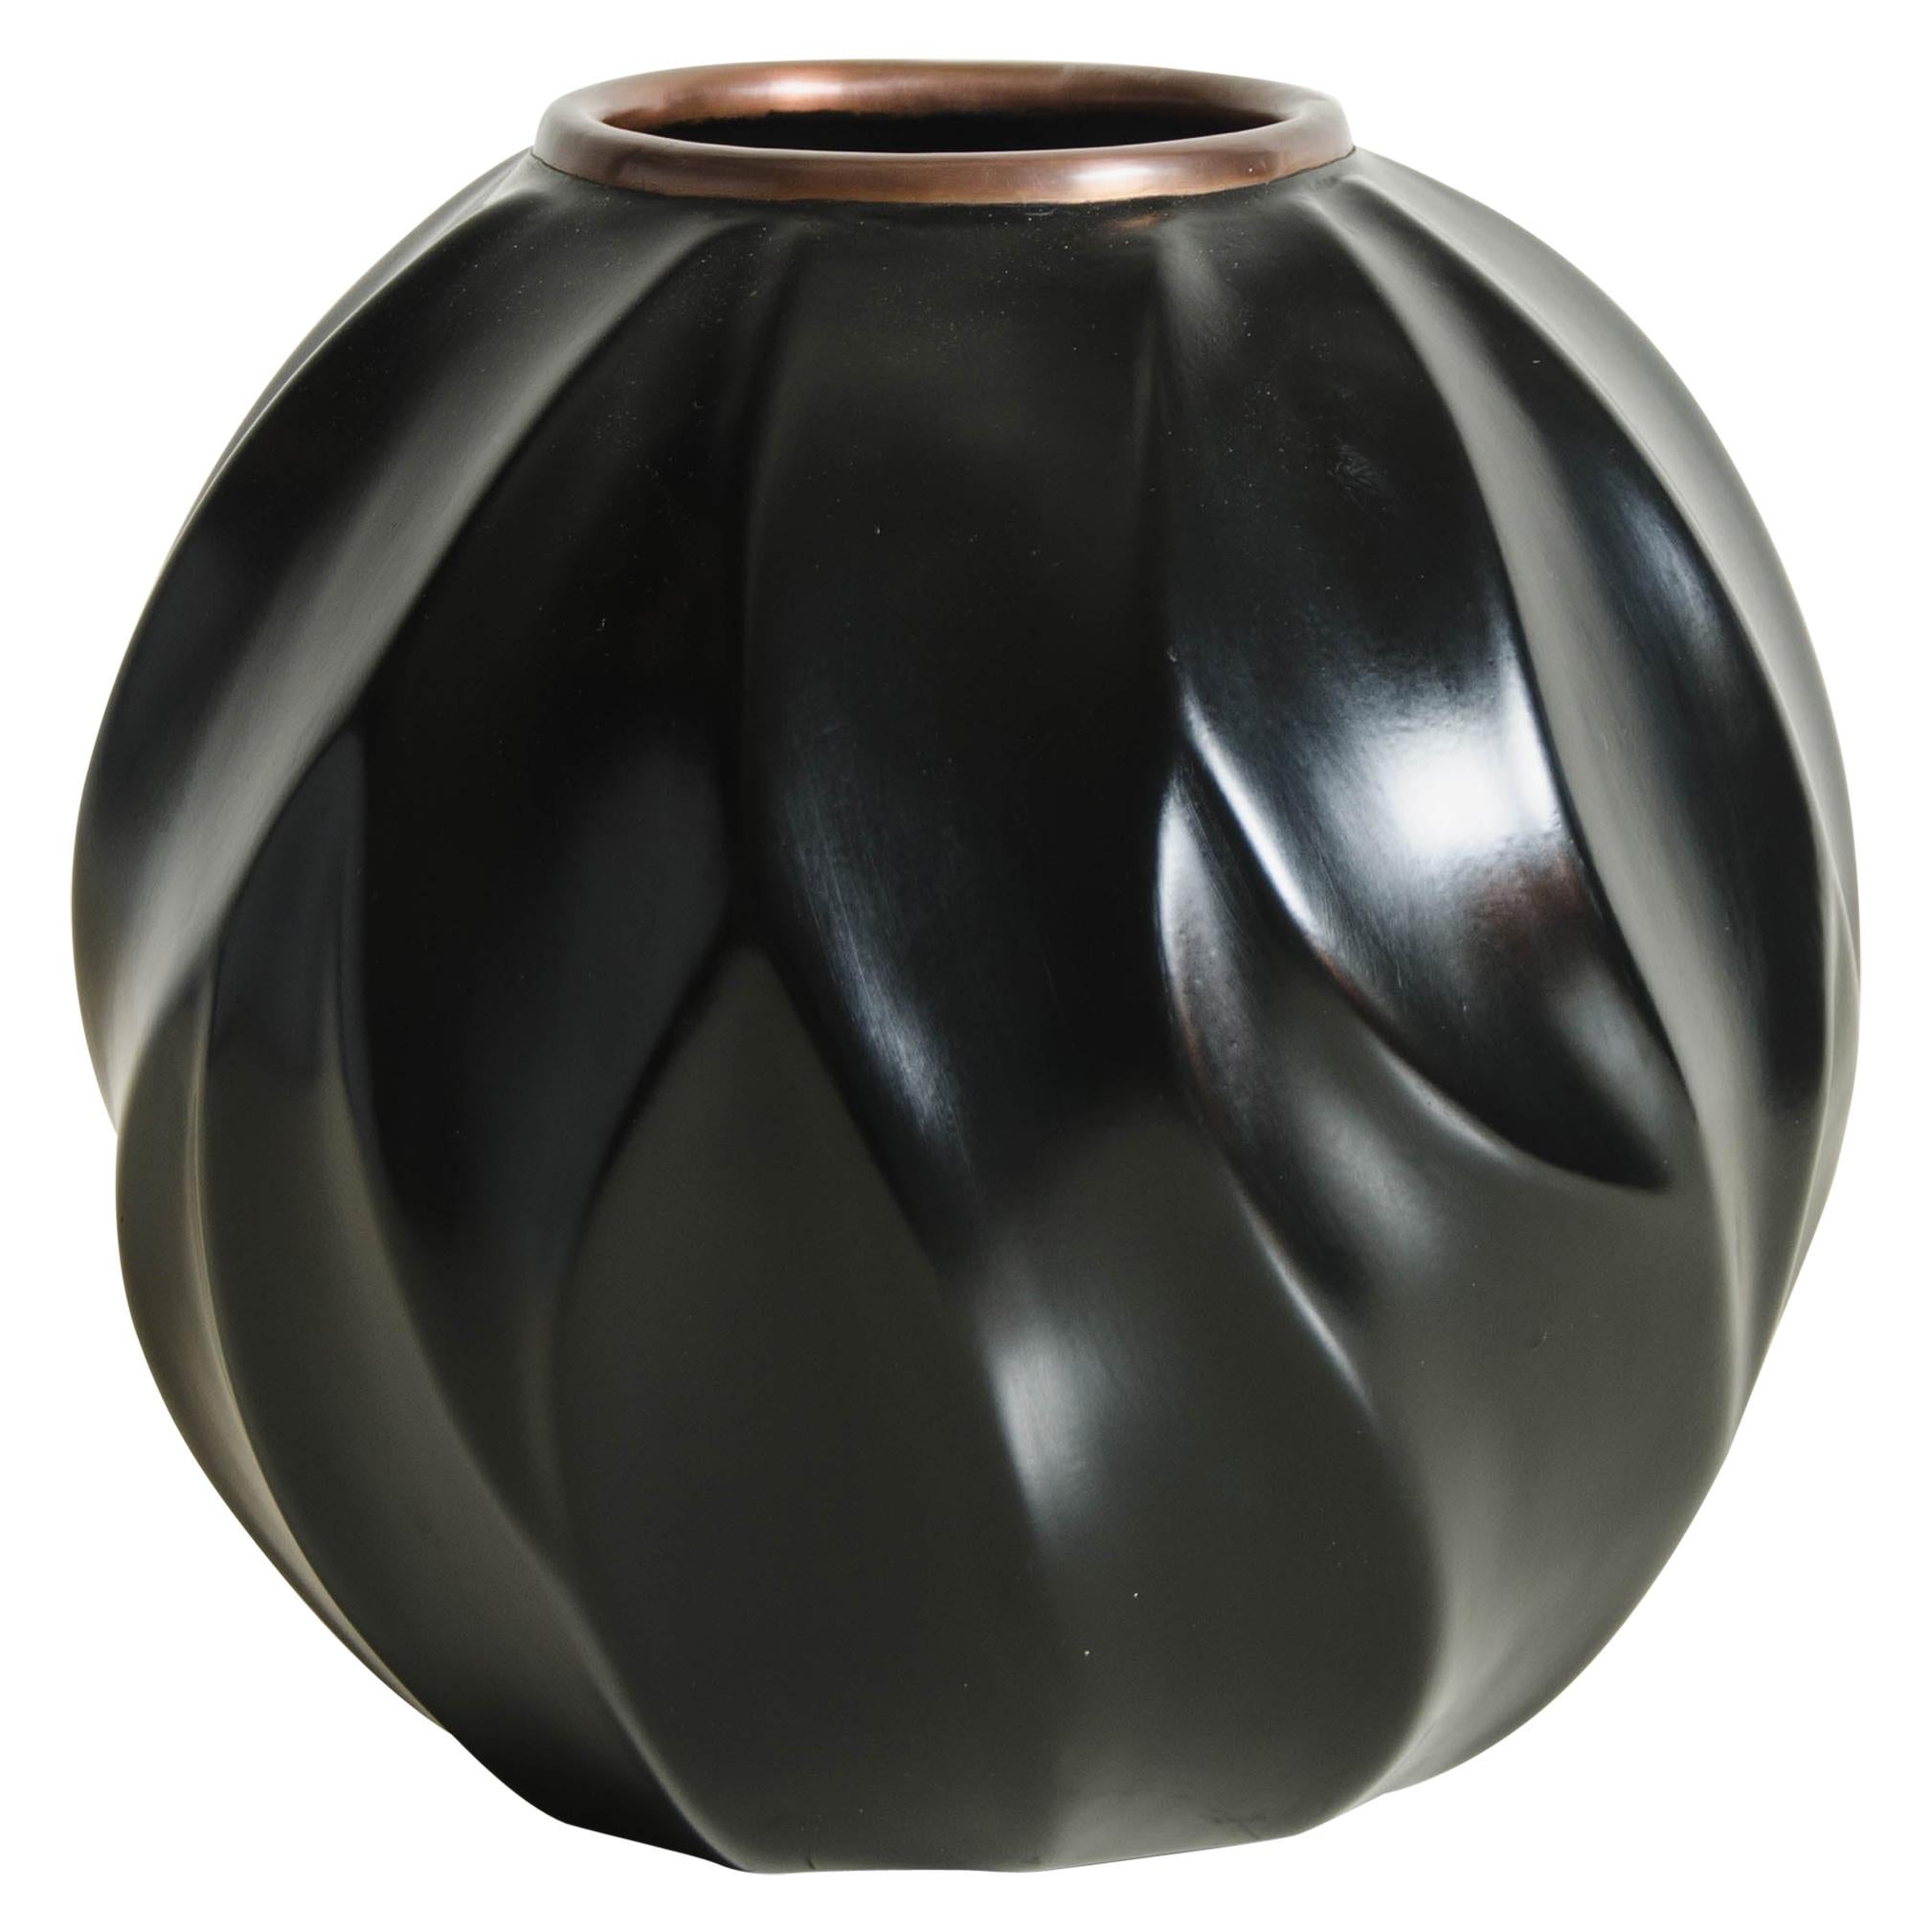 Leaf Jar with Copper Rim in Black Lacquer by Robert Kuo, Limited Edition For Sale